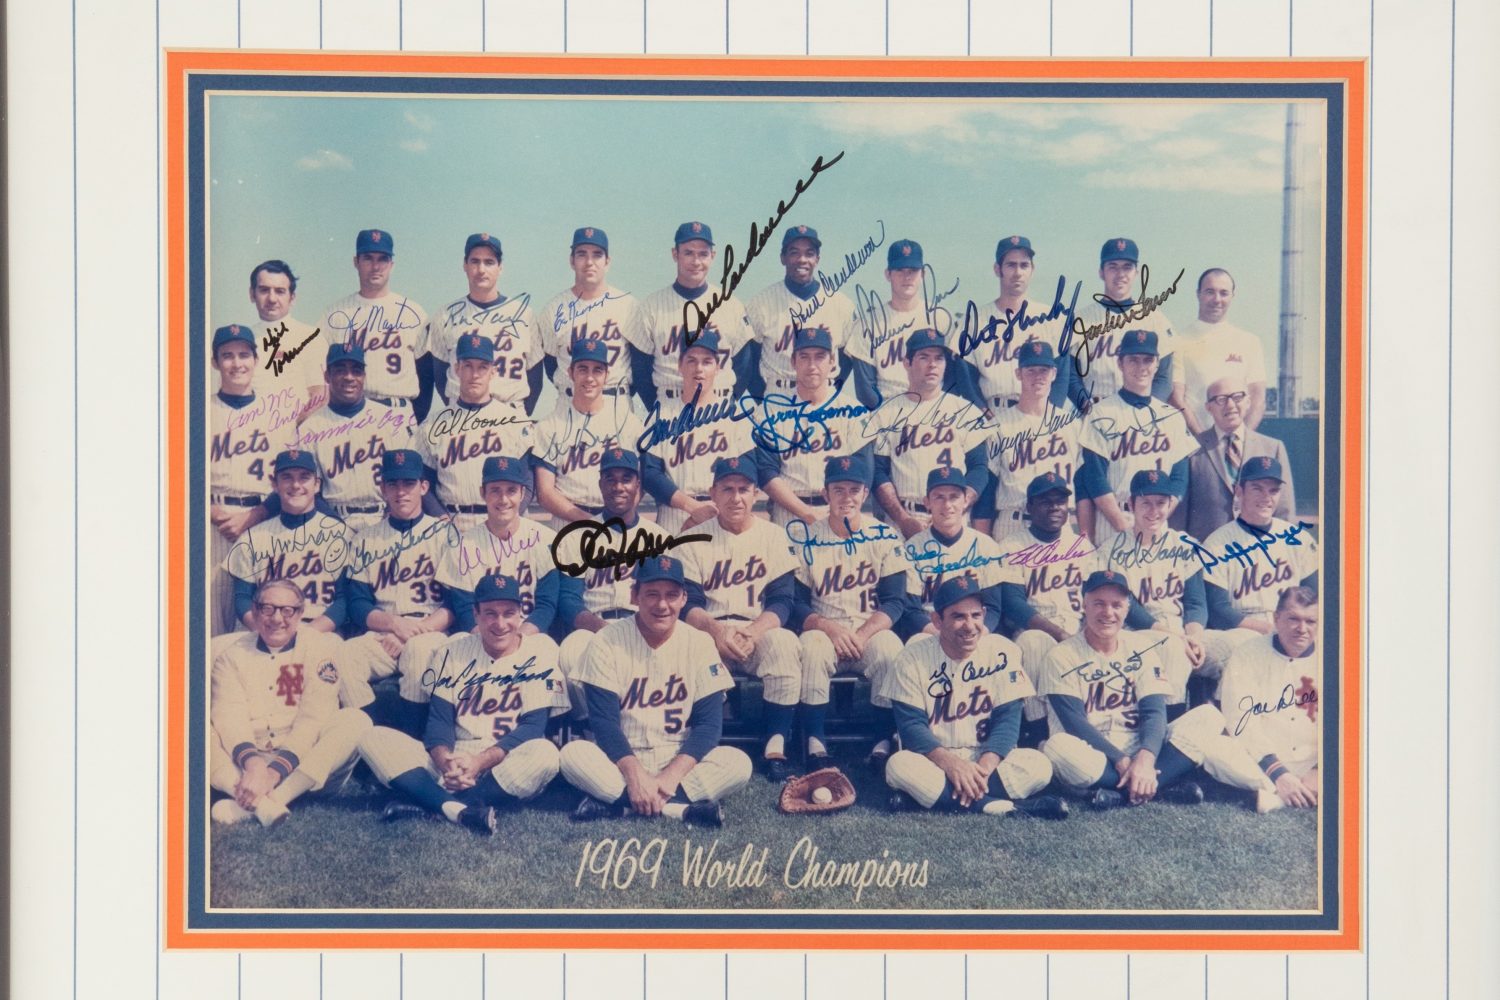 Autographed Frame Photo of 1969 Mets Team